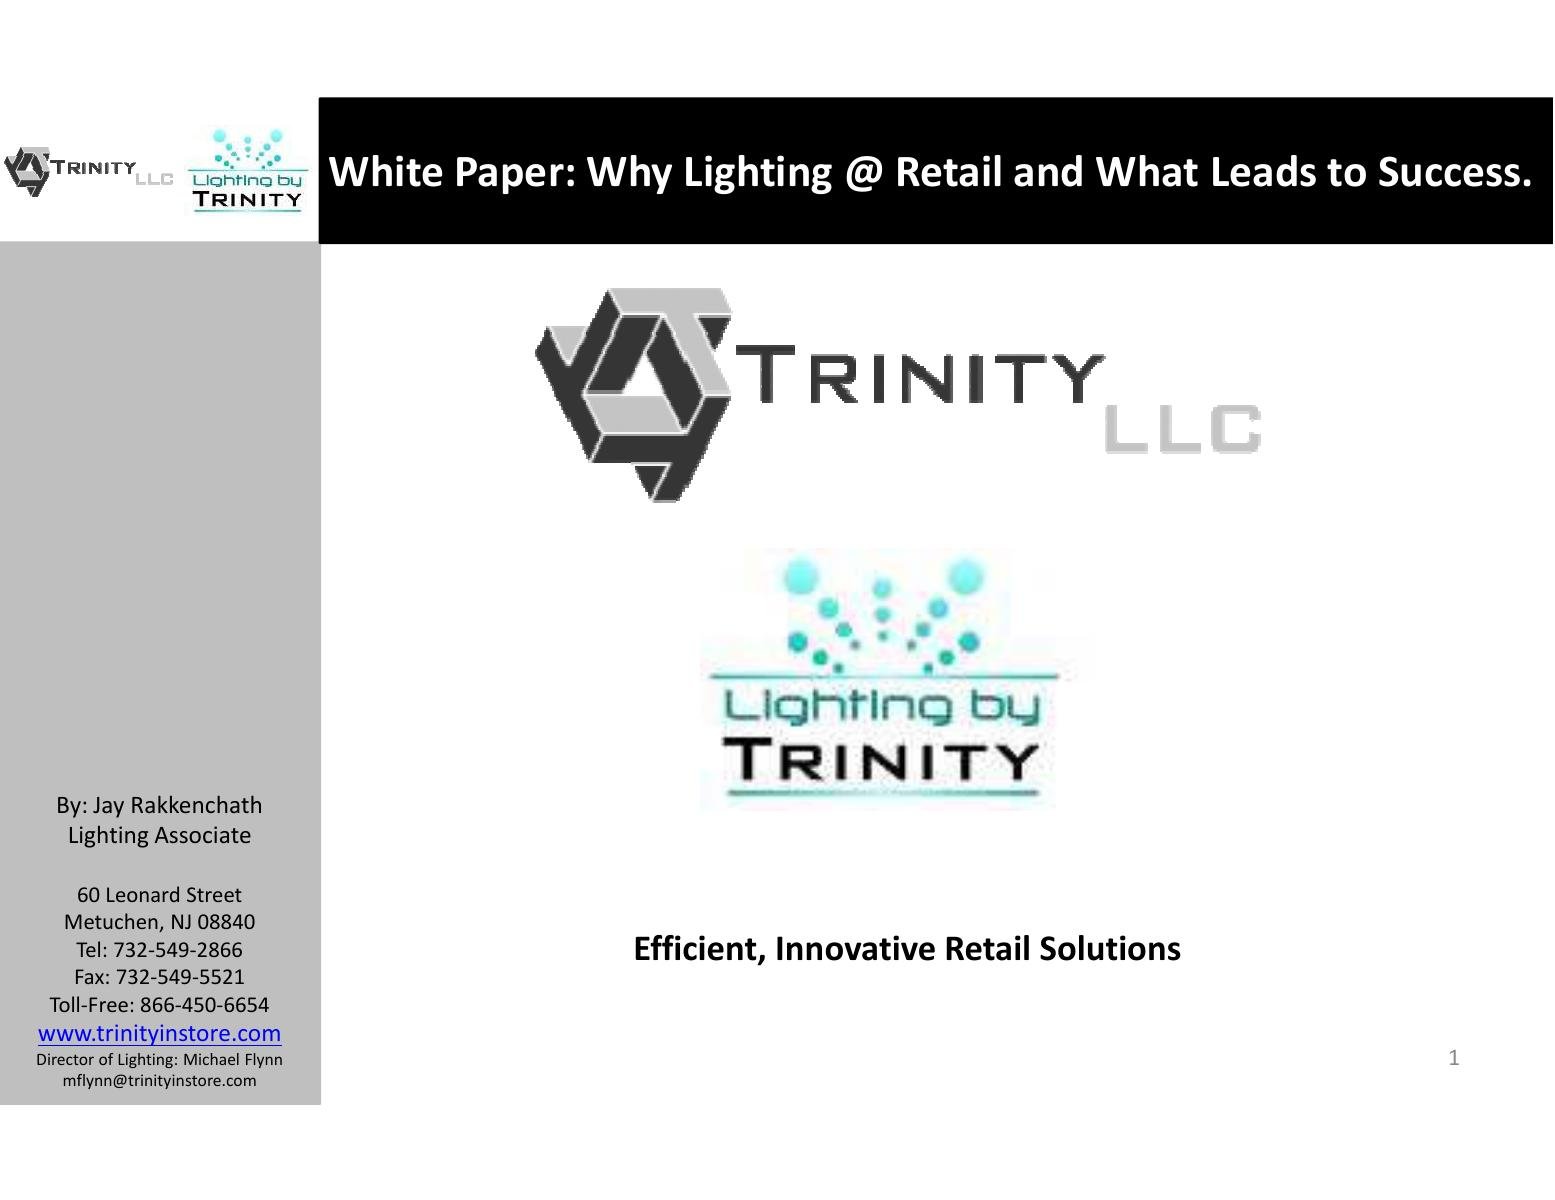 Why Lighting? At Retail and What Leads to Success?